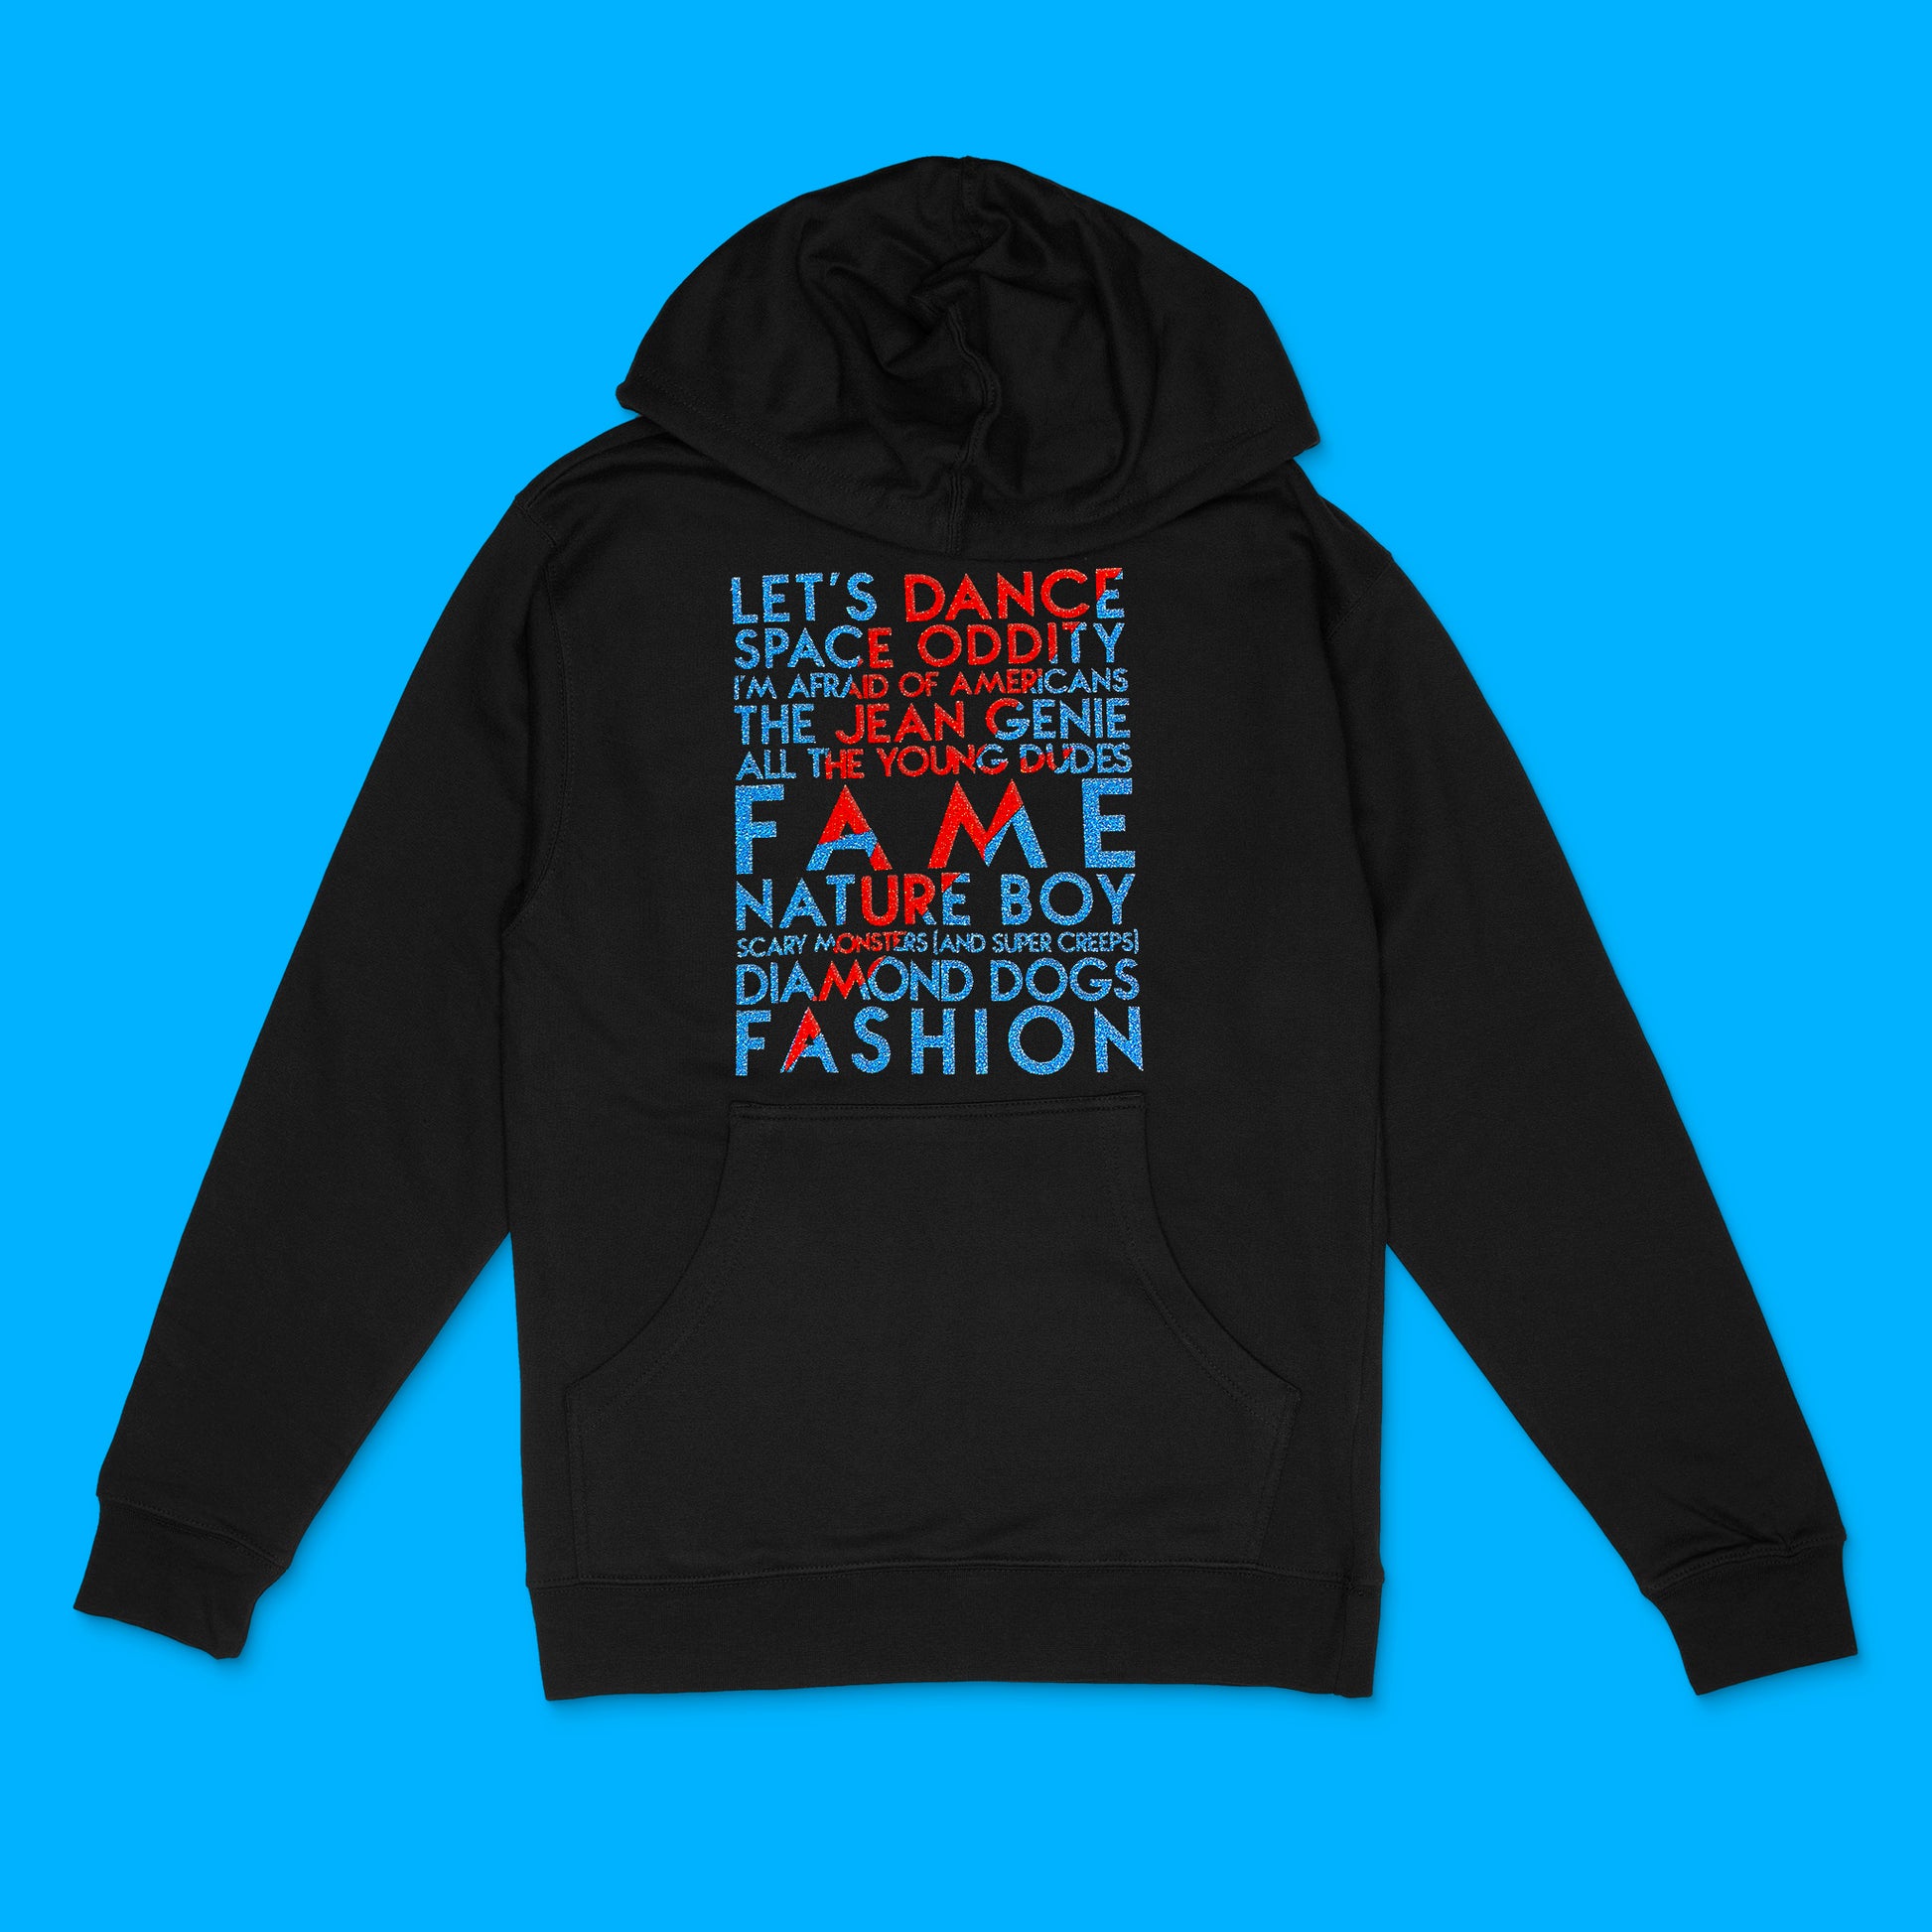 David Bowie song titles with lightning bolt icon in red and blue glitter text on black unisex hooded sweathshirt - Customizable YourTen David Bowie Icon hooded sweatshirt by BBJ / Glitter Garage